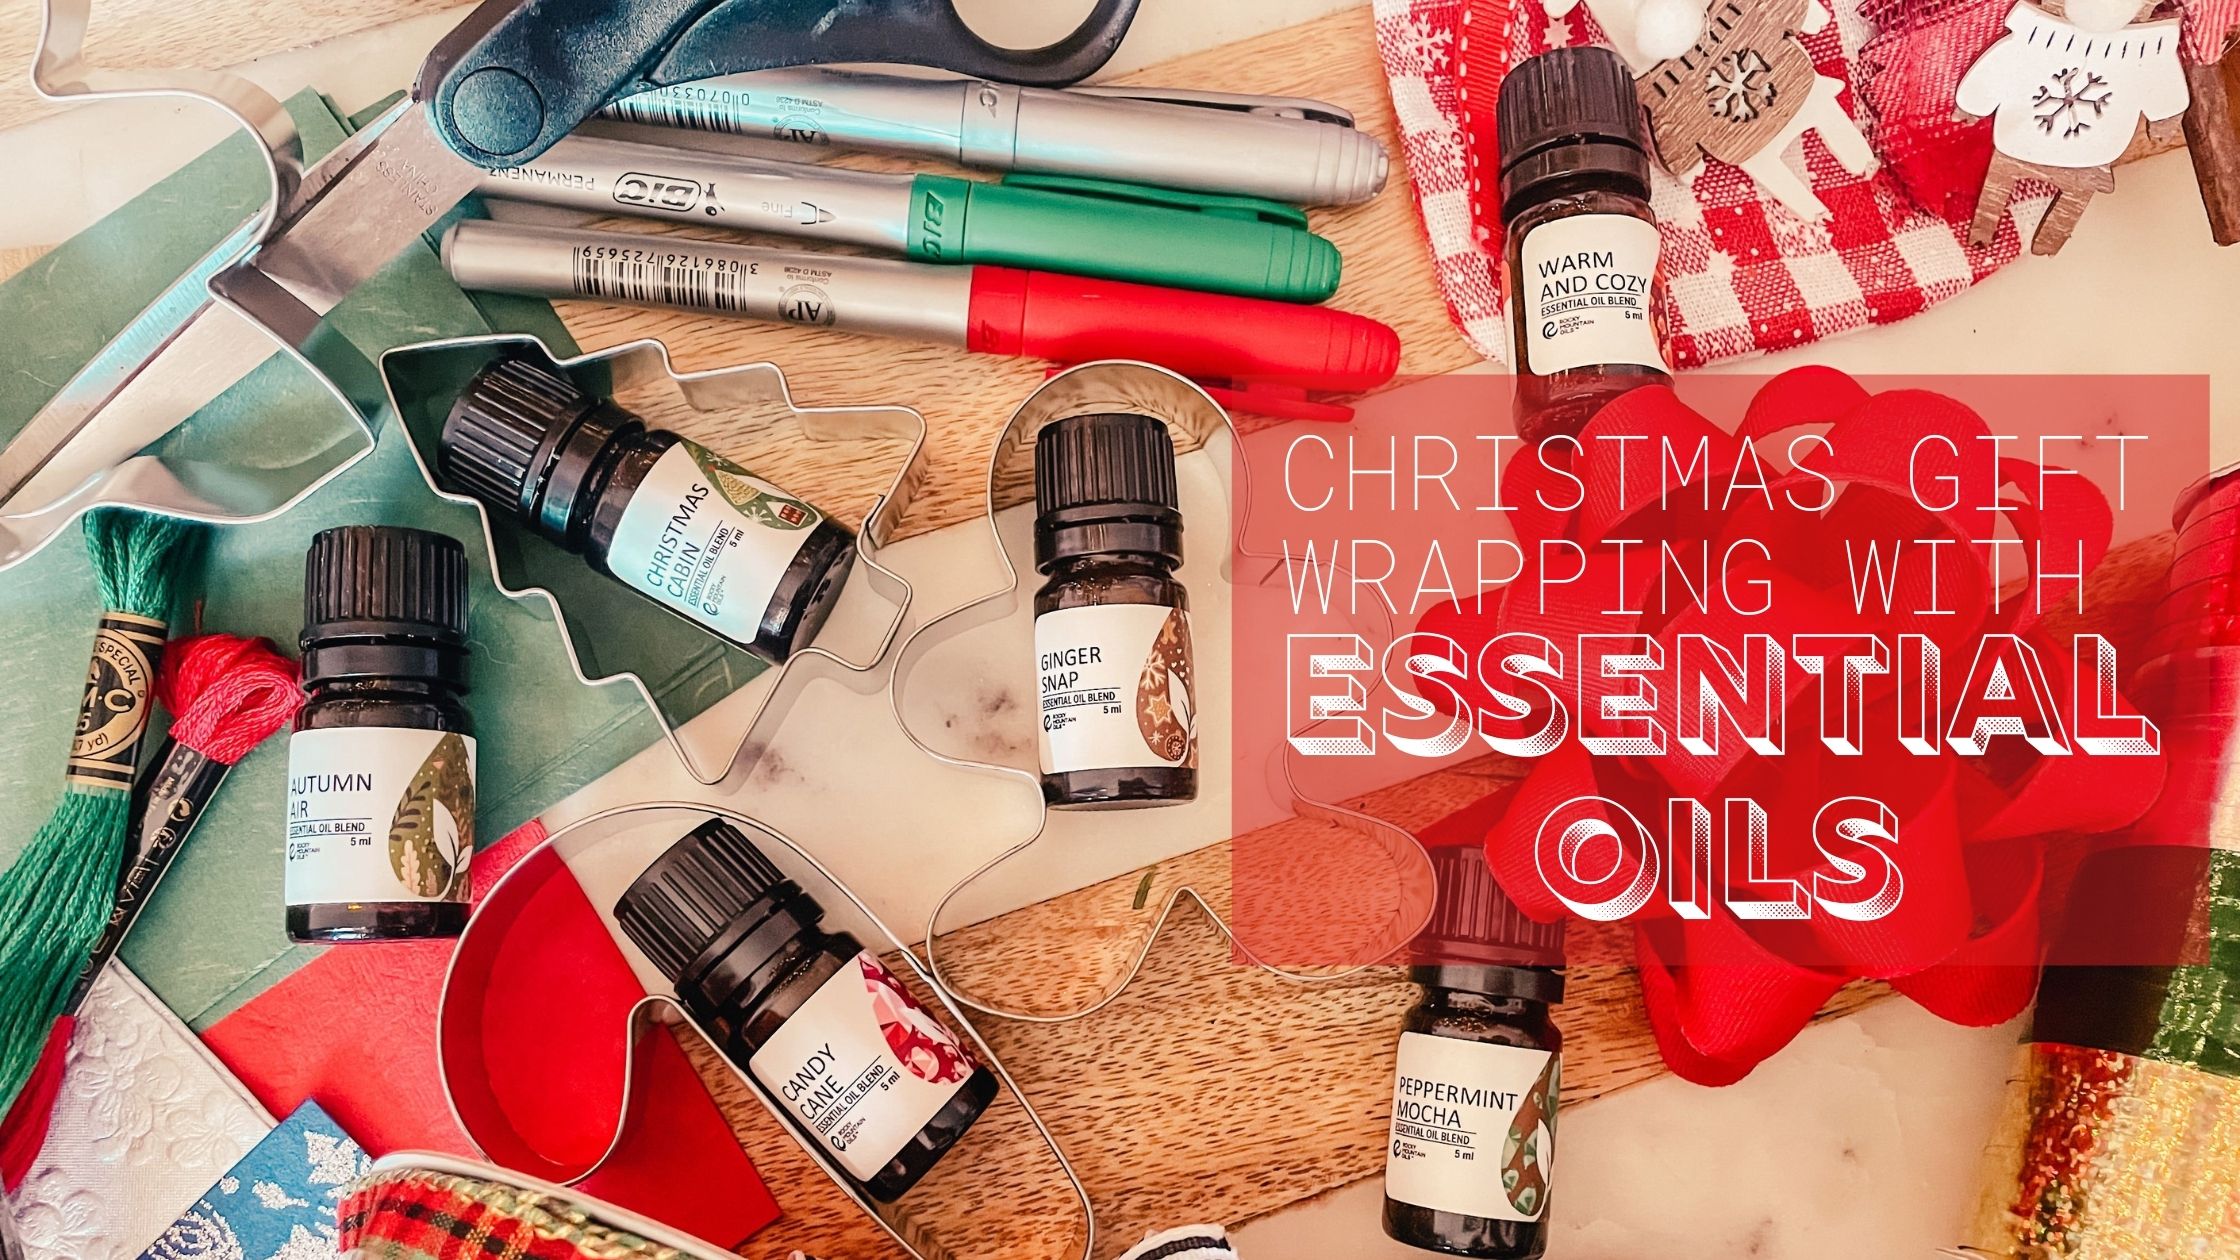 Christmas Gift Wrapping with essential oils